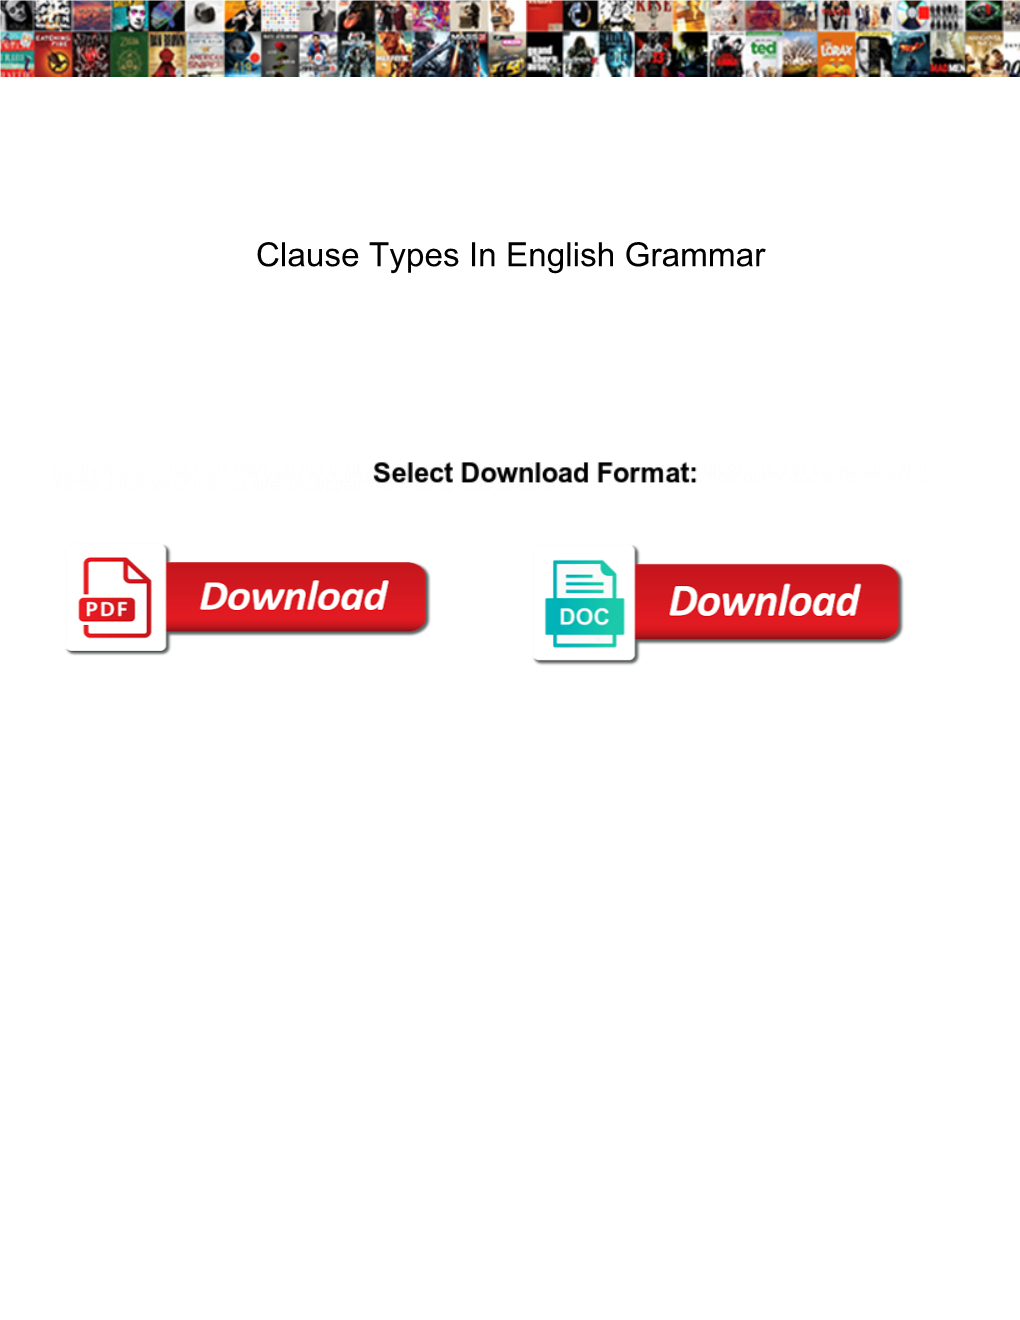 Clause Types in English Grammar